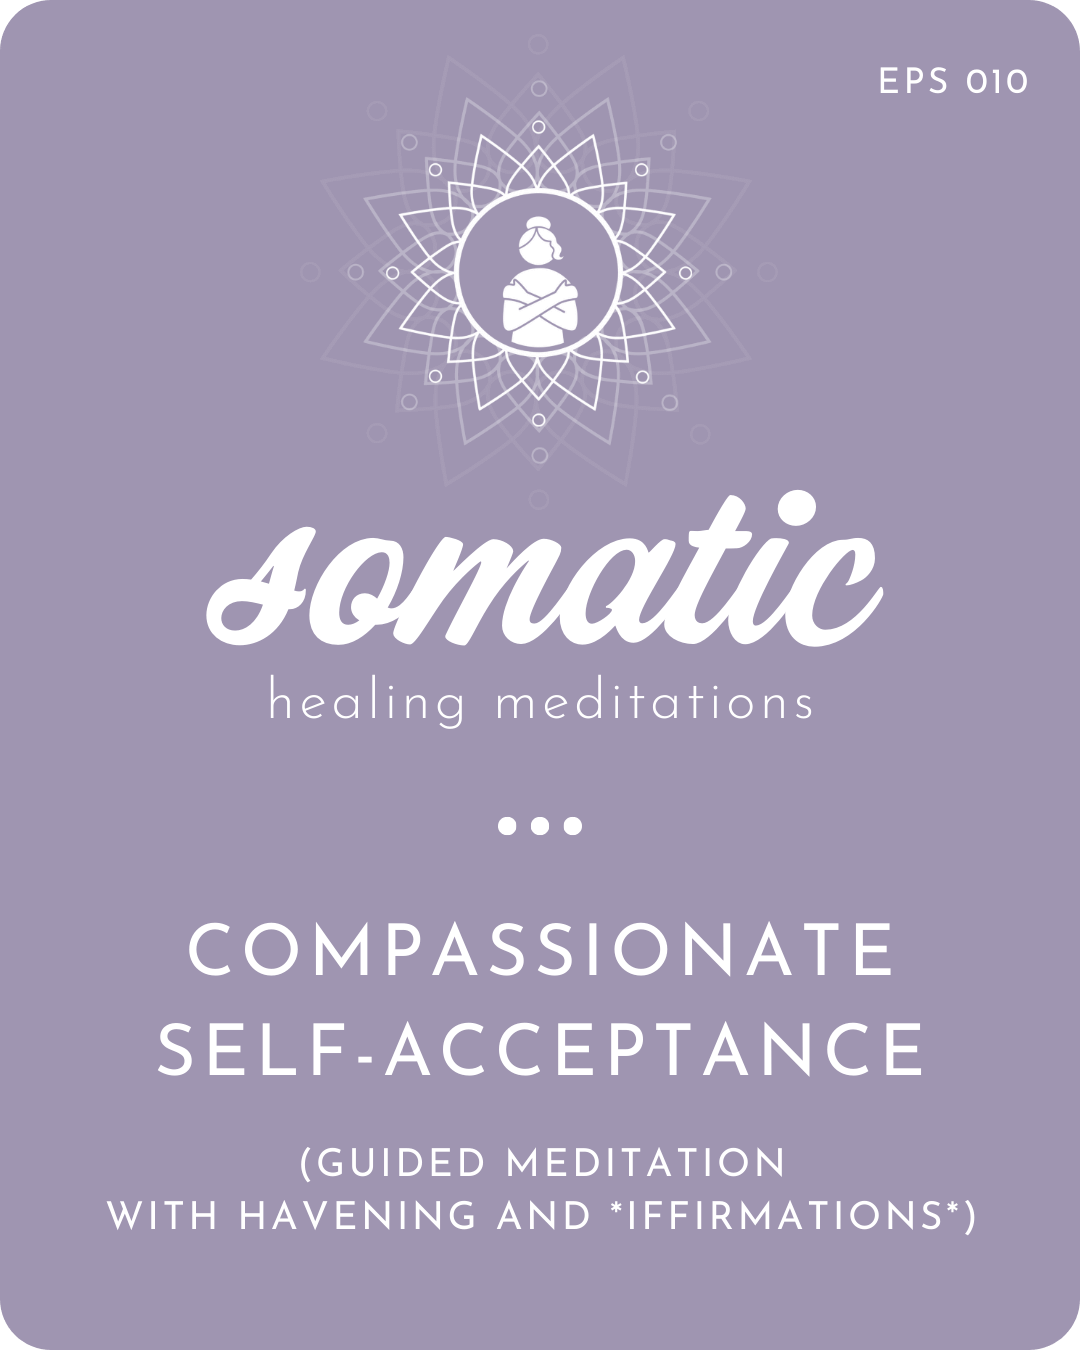 Compassionate Self-Acceptance Guided Meditation Using Havening and Iffirmations